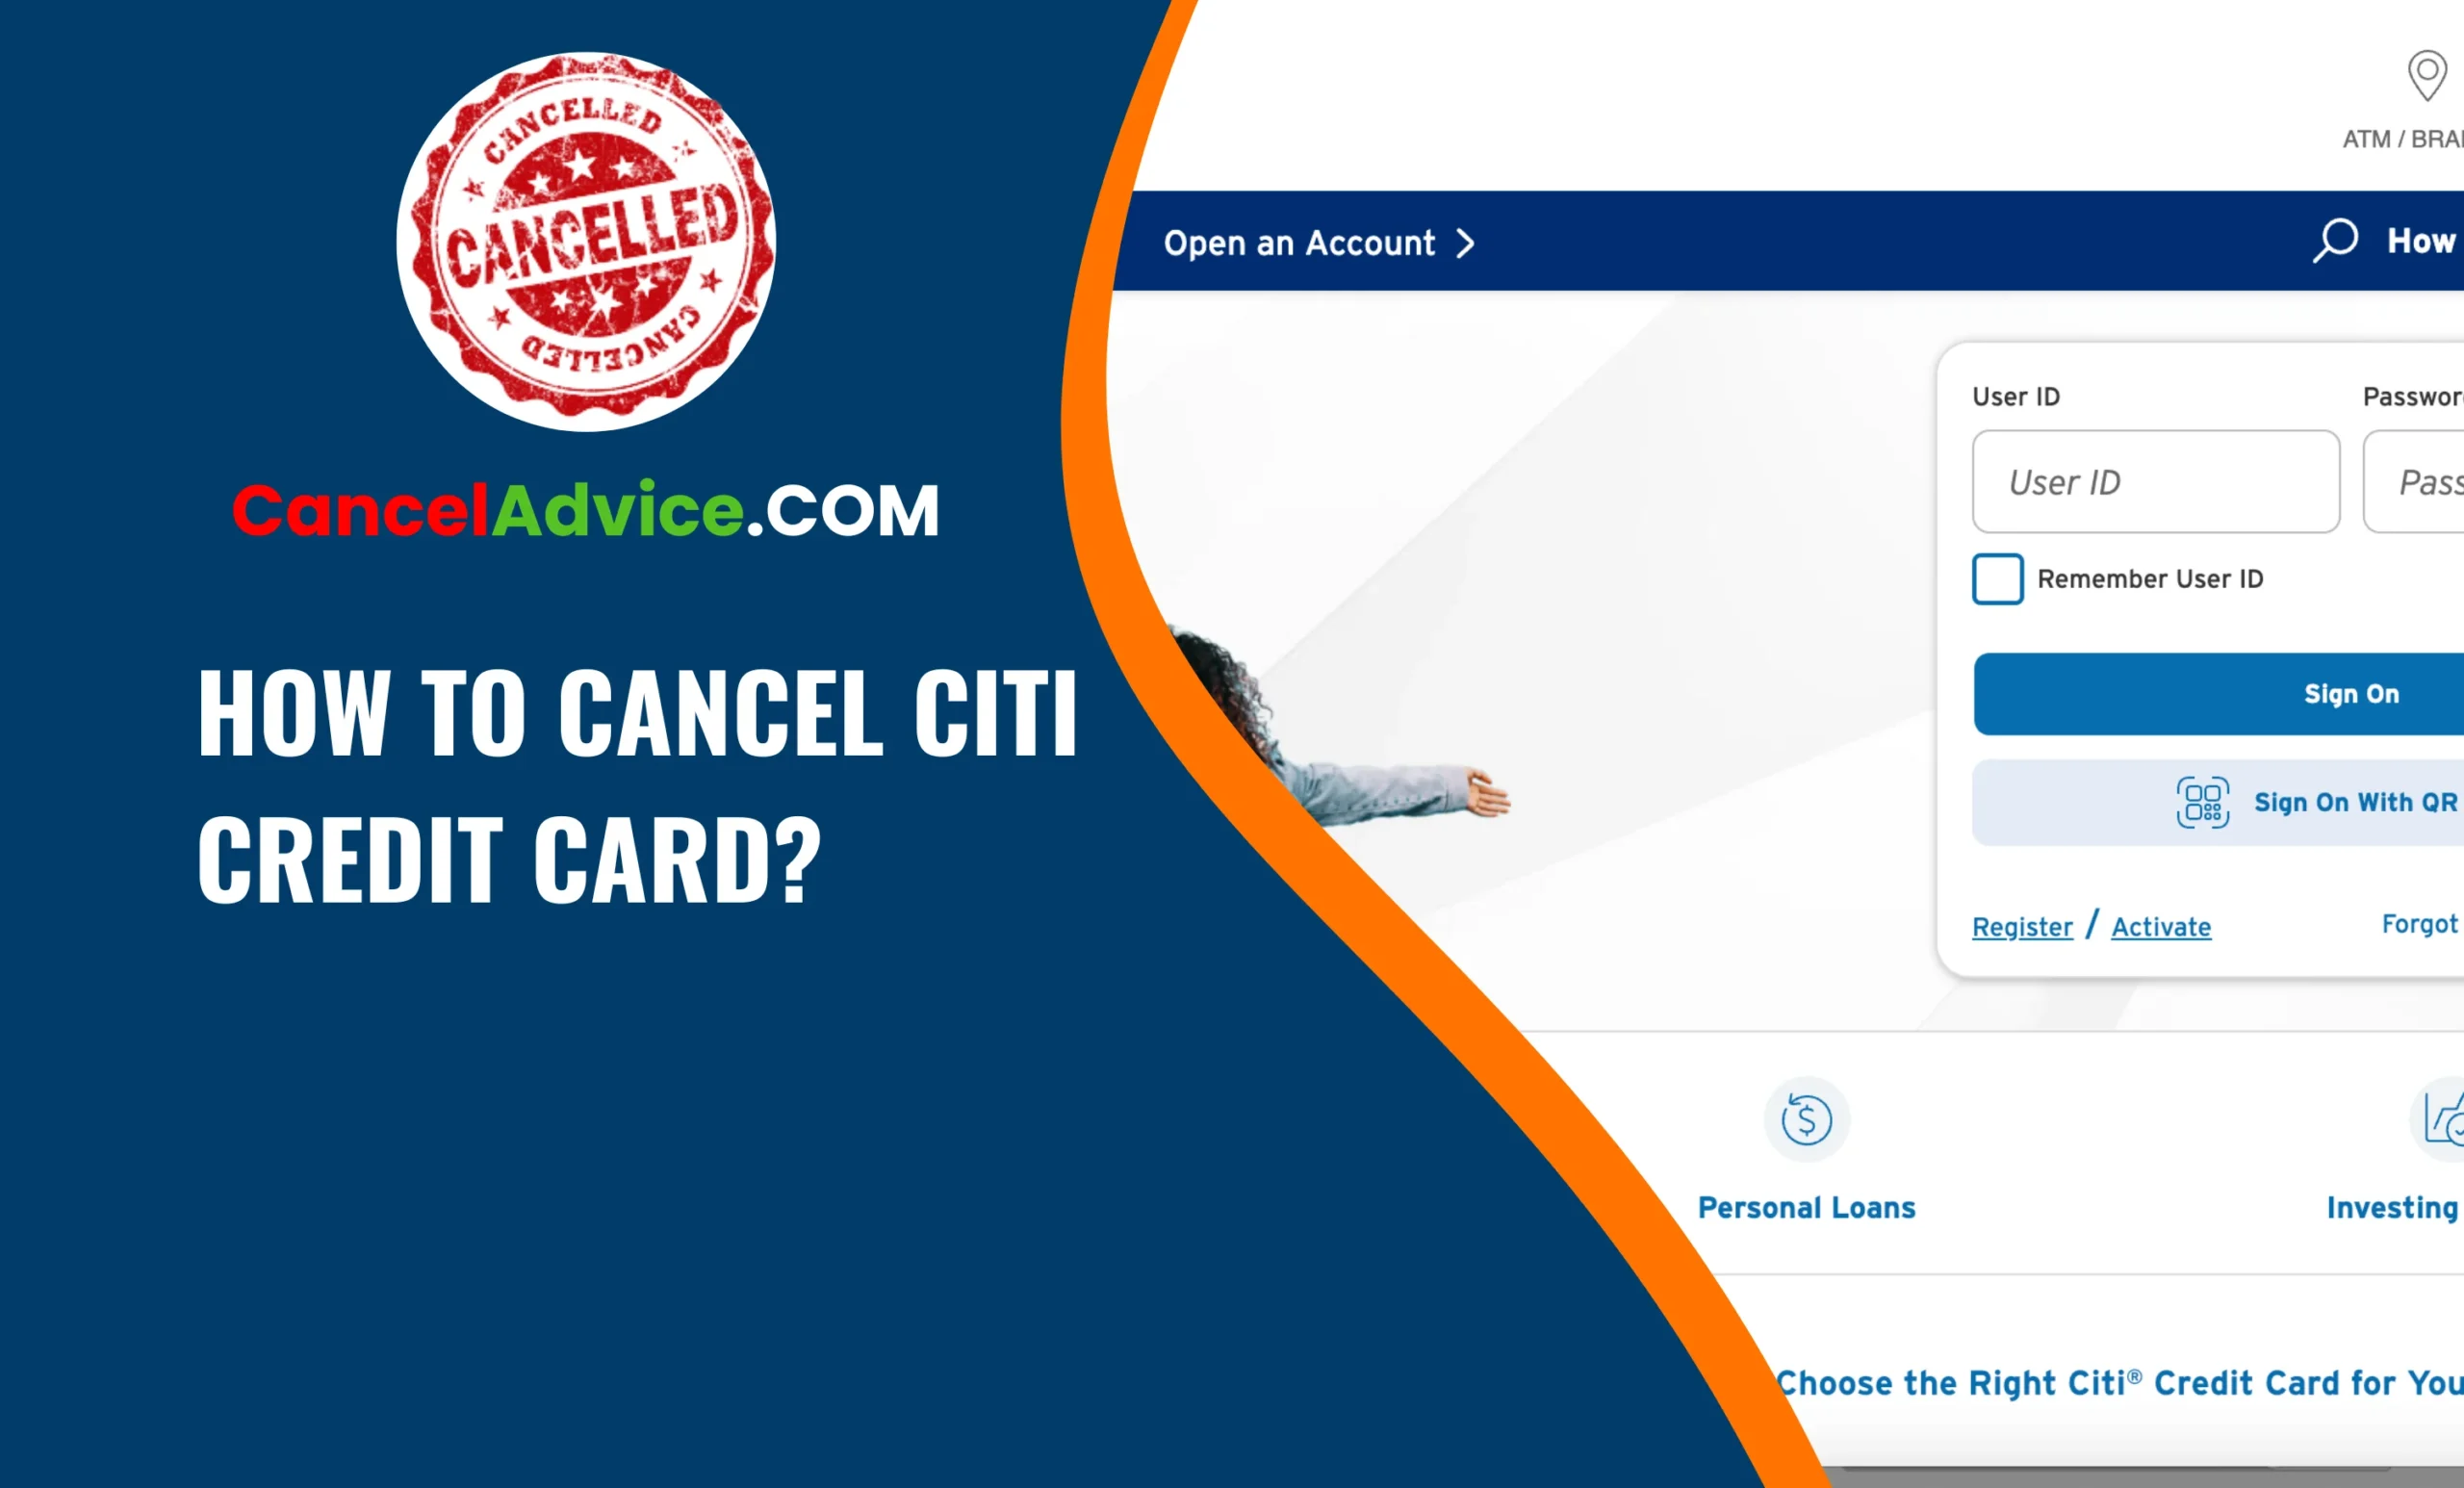 How to Cancel a Citi Credit Card